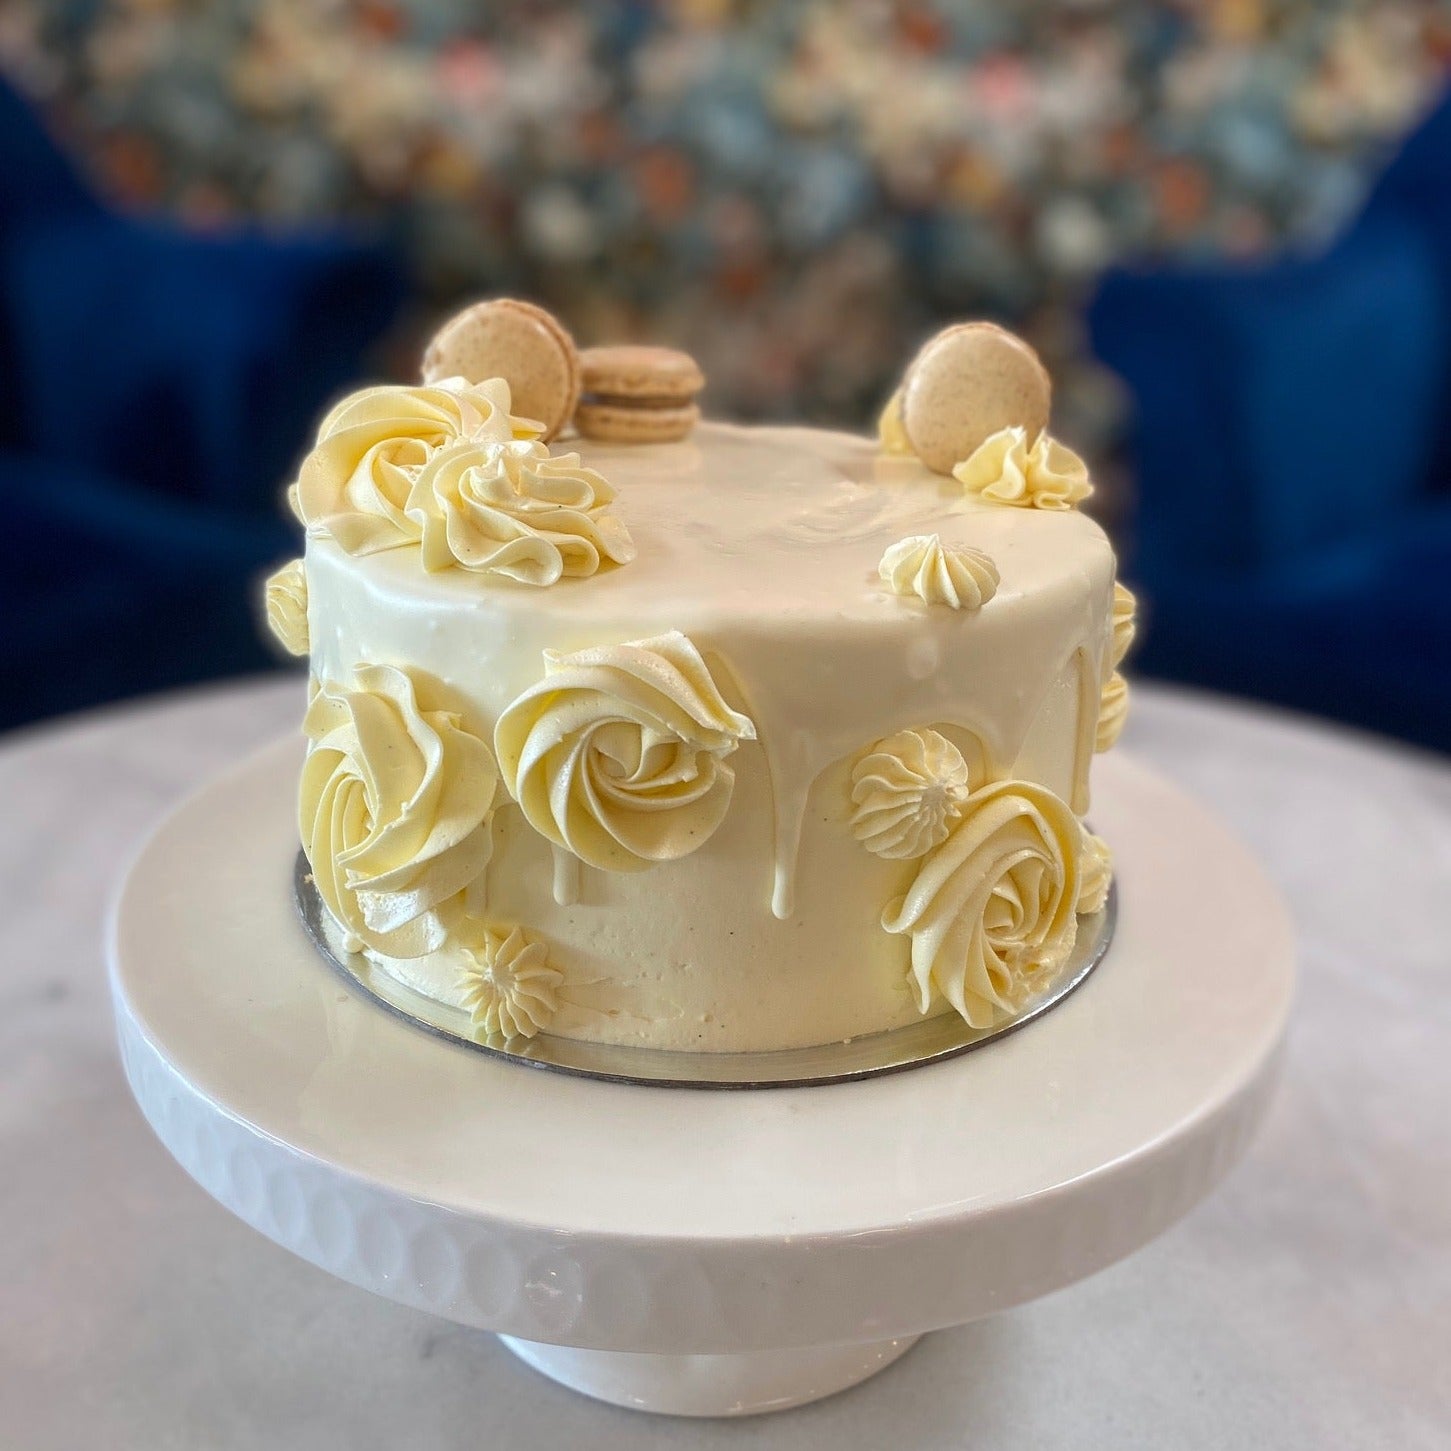 White 2 layer cake with Macarons from Sweet Creations in Blenheim, NZ